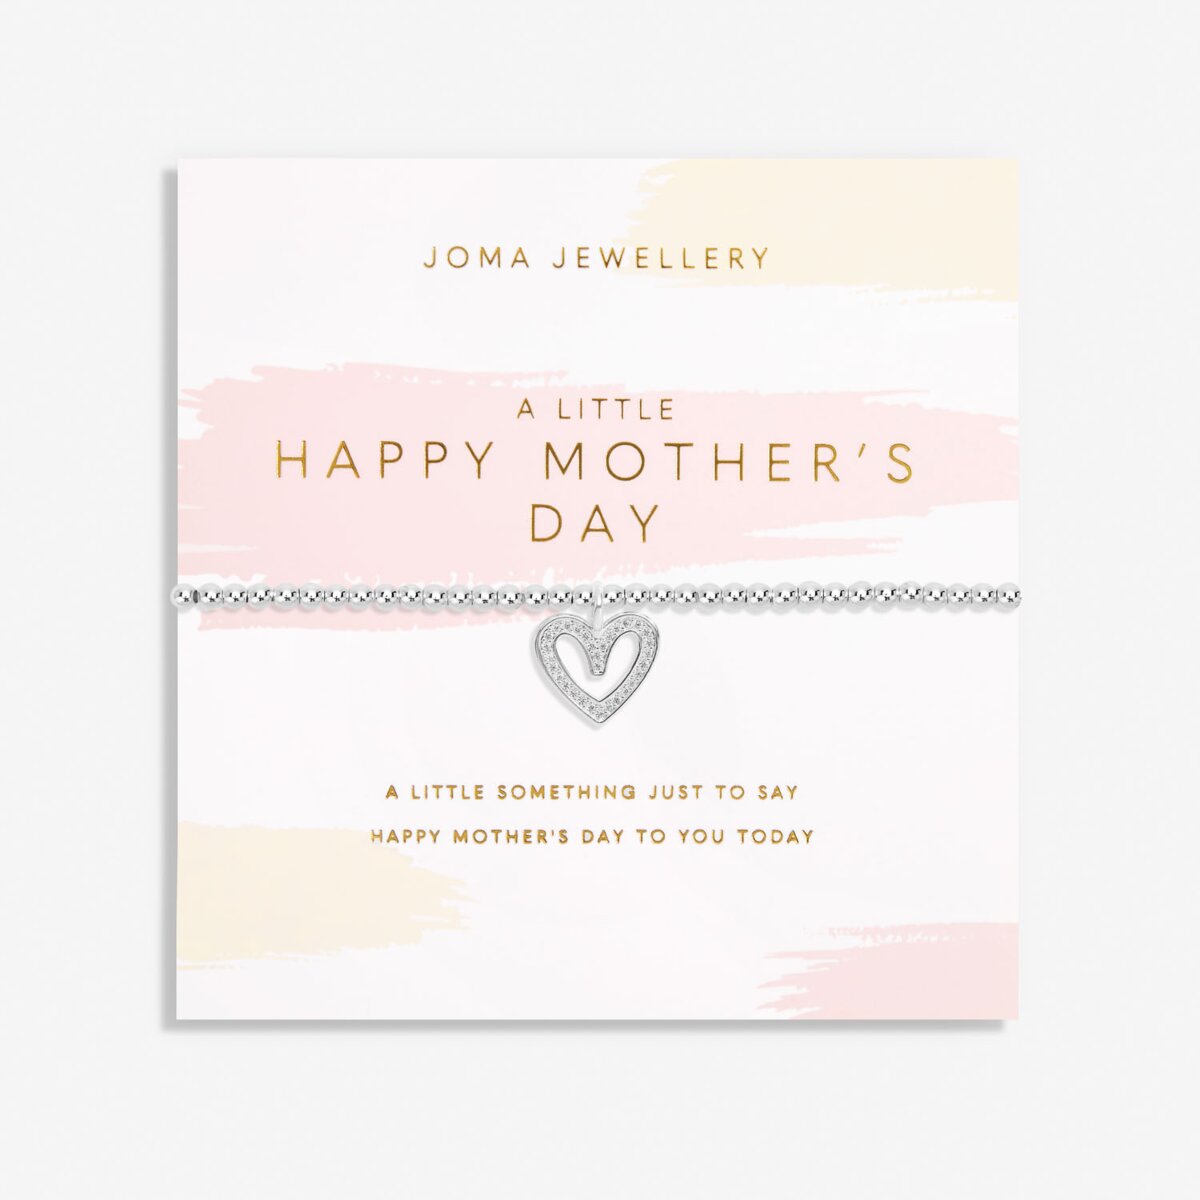 JOMA JEWELLERY | MOTHER'S DAY A LITTLE | HAPPY MOTHER'S DAY BRACELET